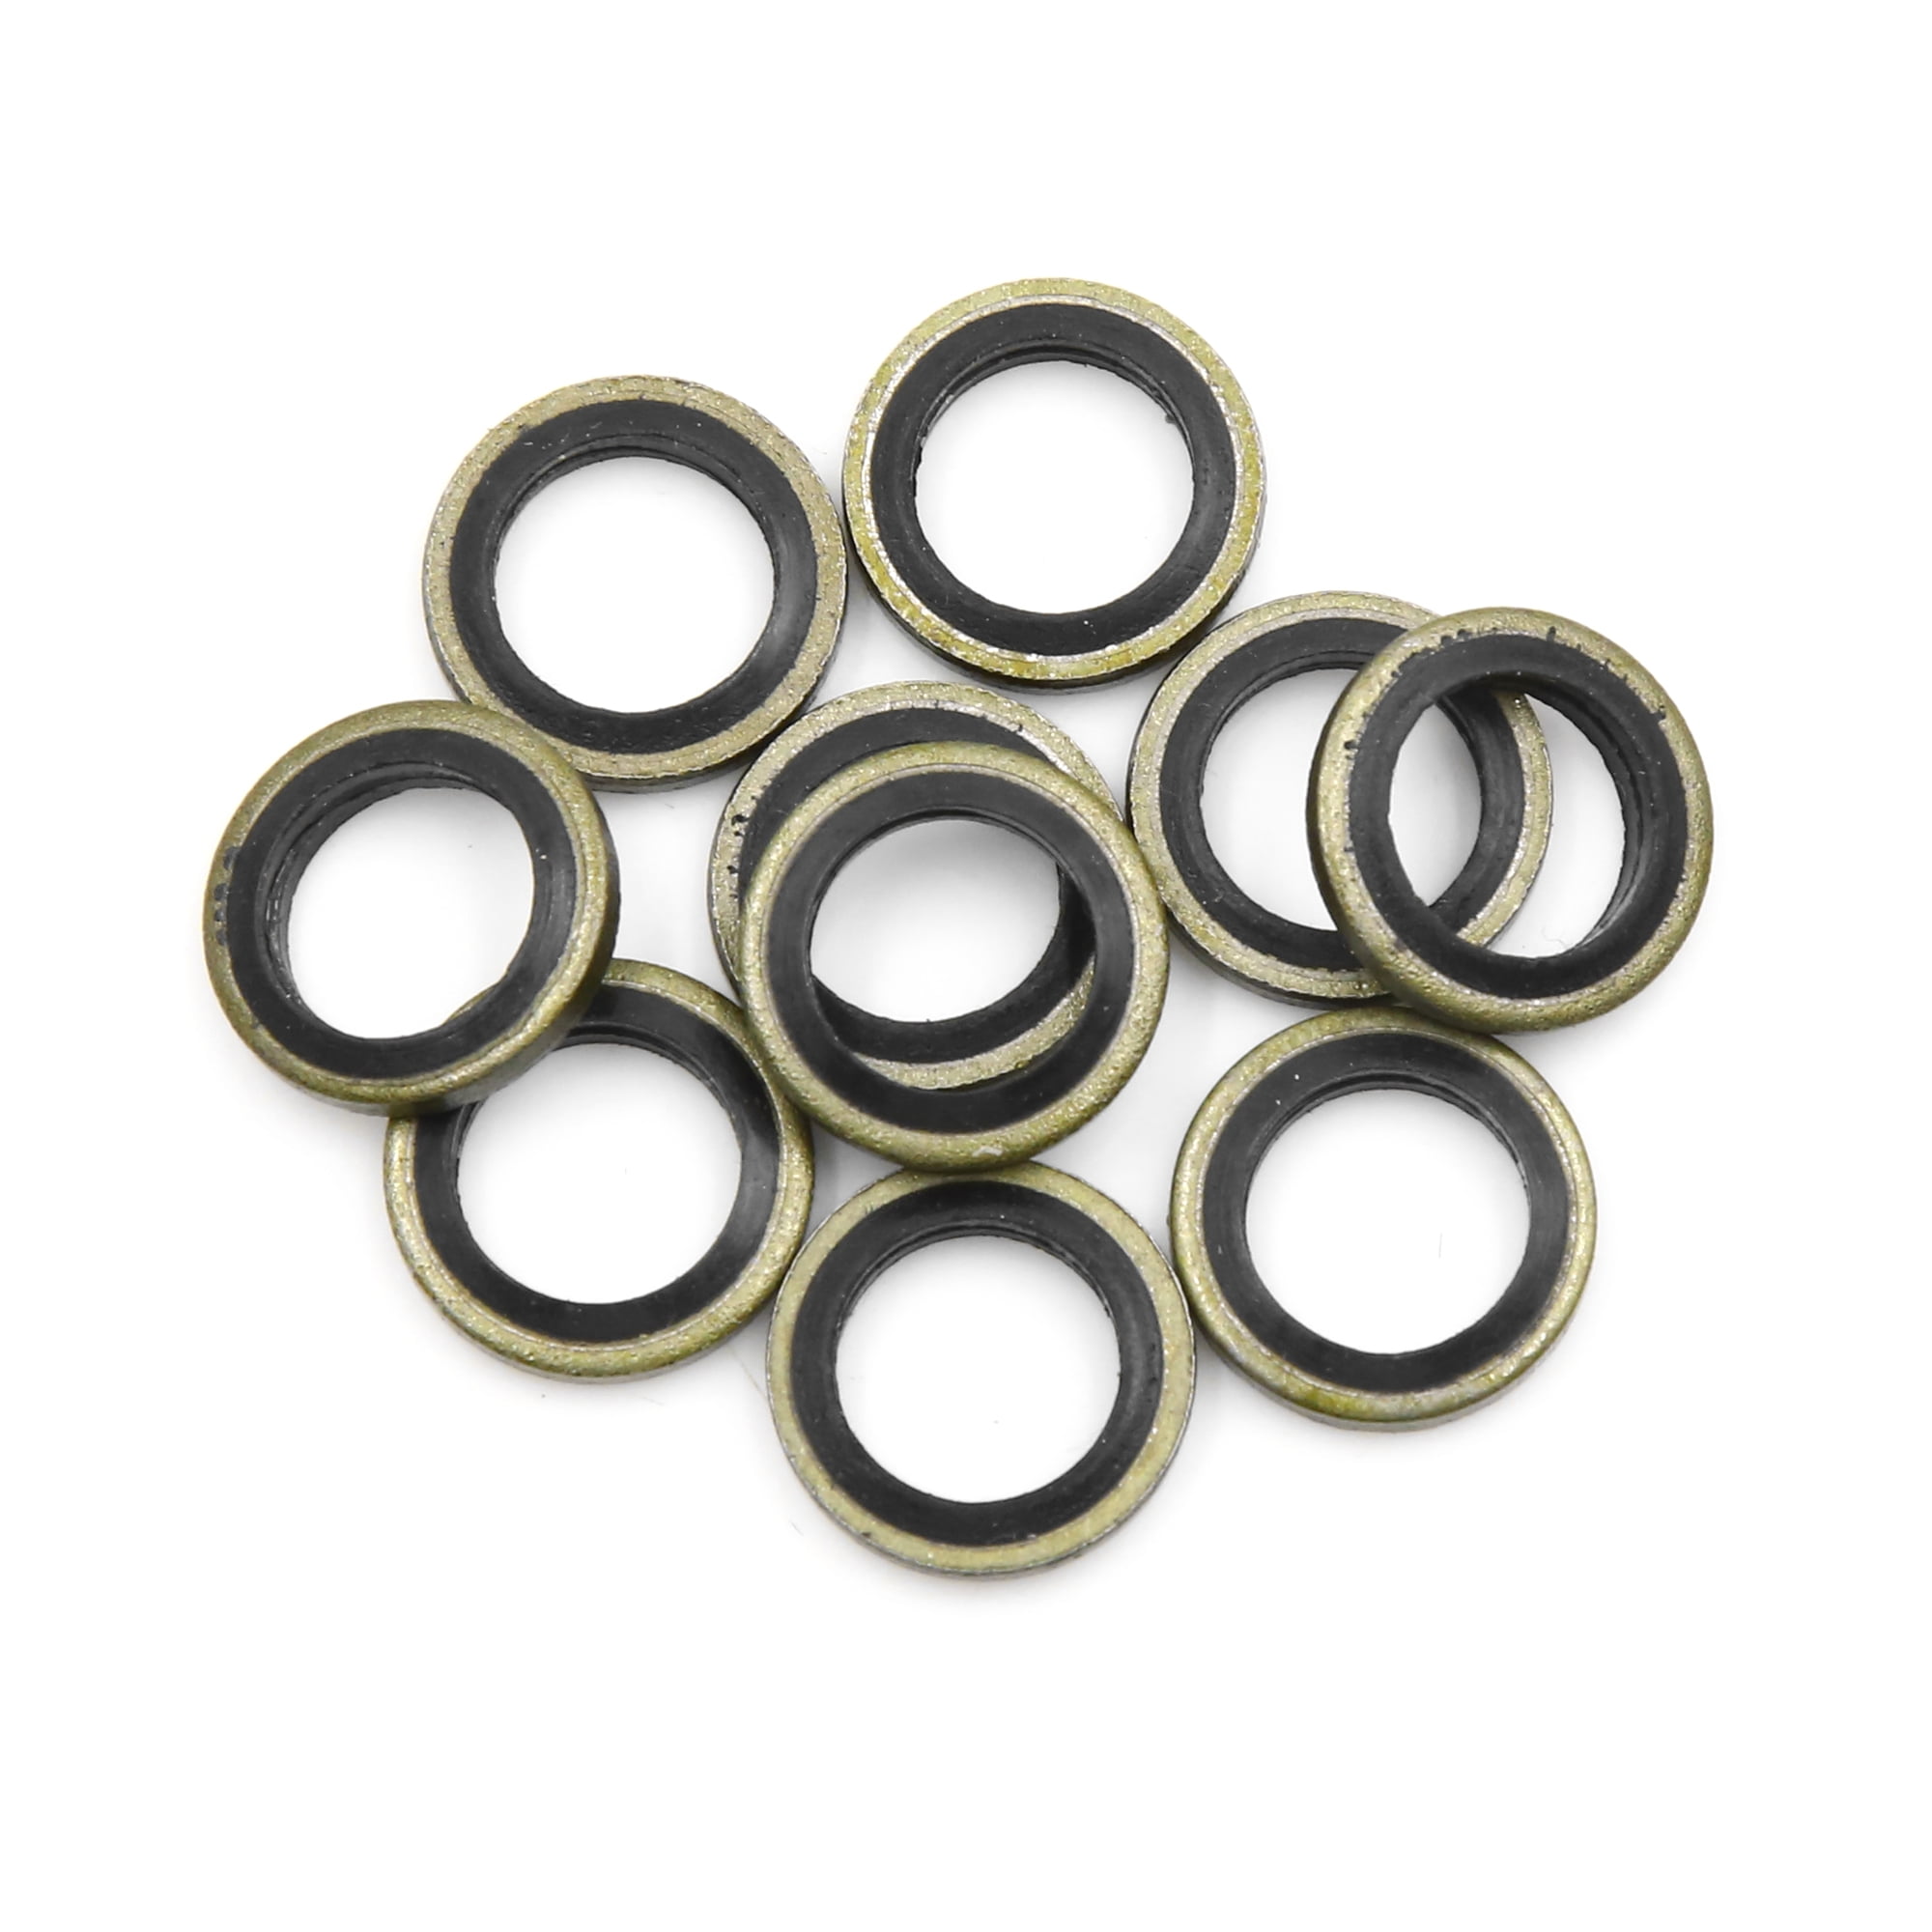 5x Universal Auto O Rings Seal Crush Washers Inside 10mm Outside 16mm Diameter 